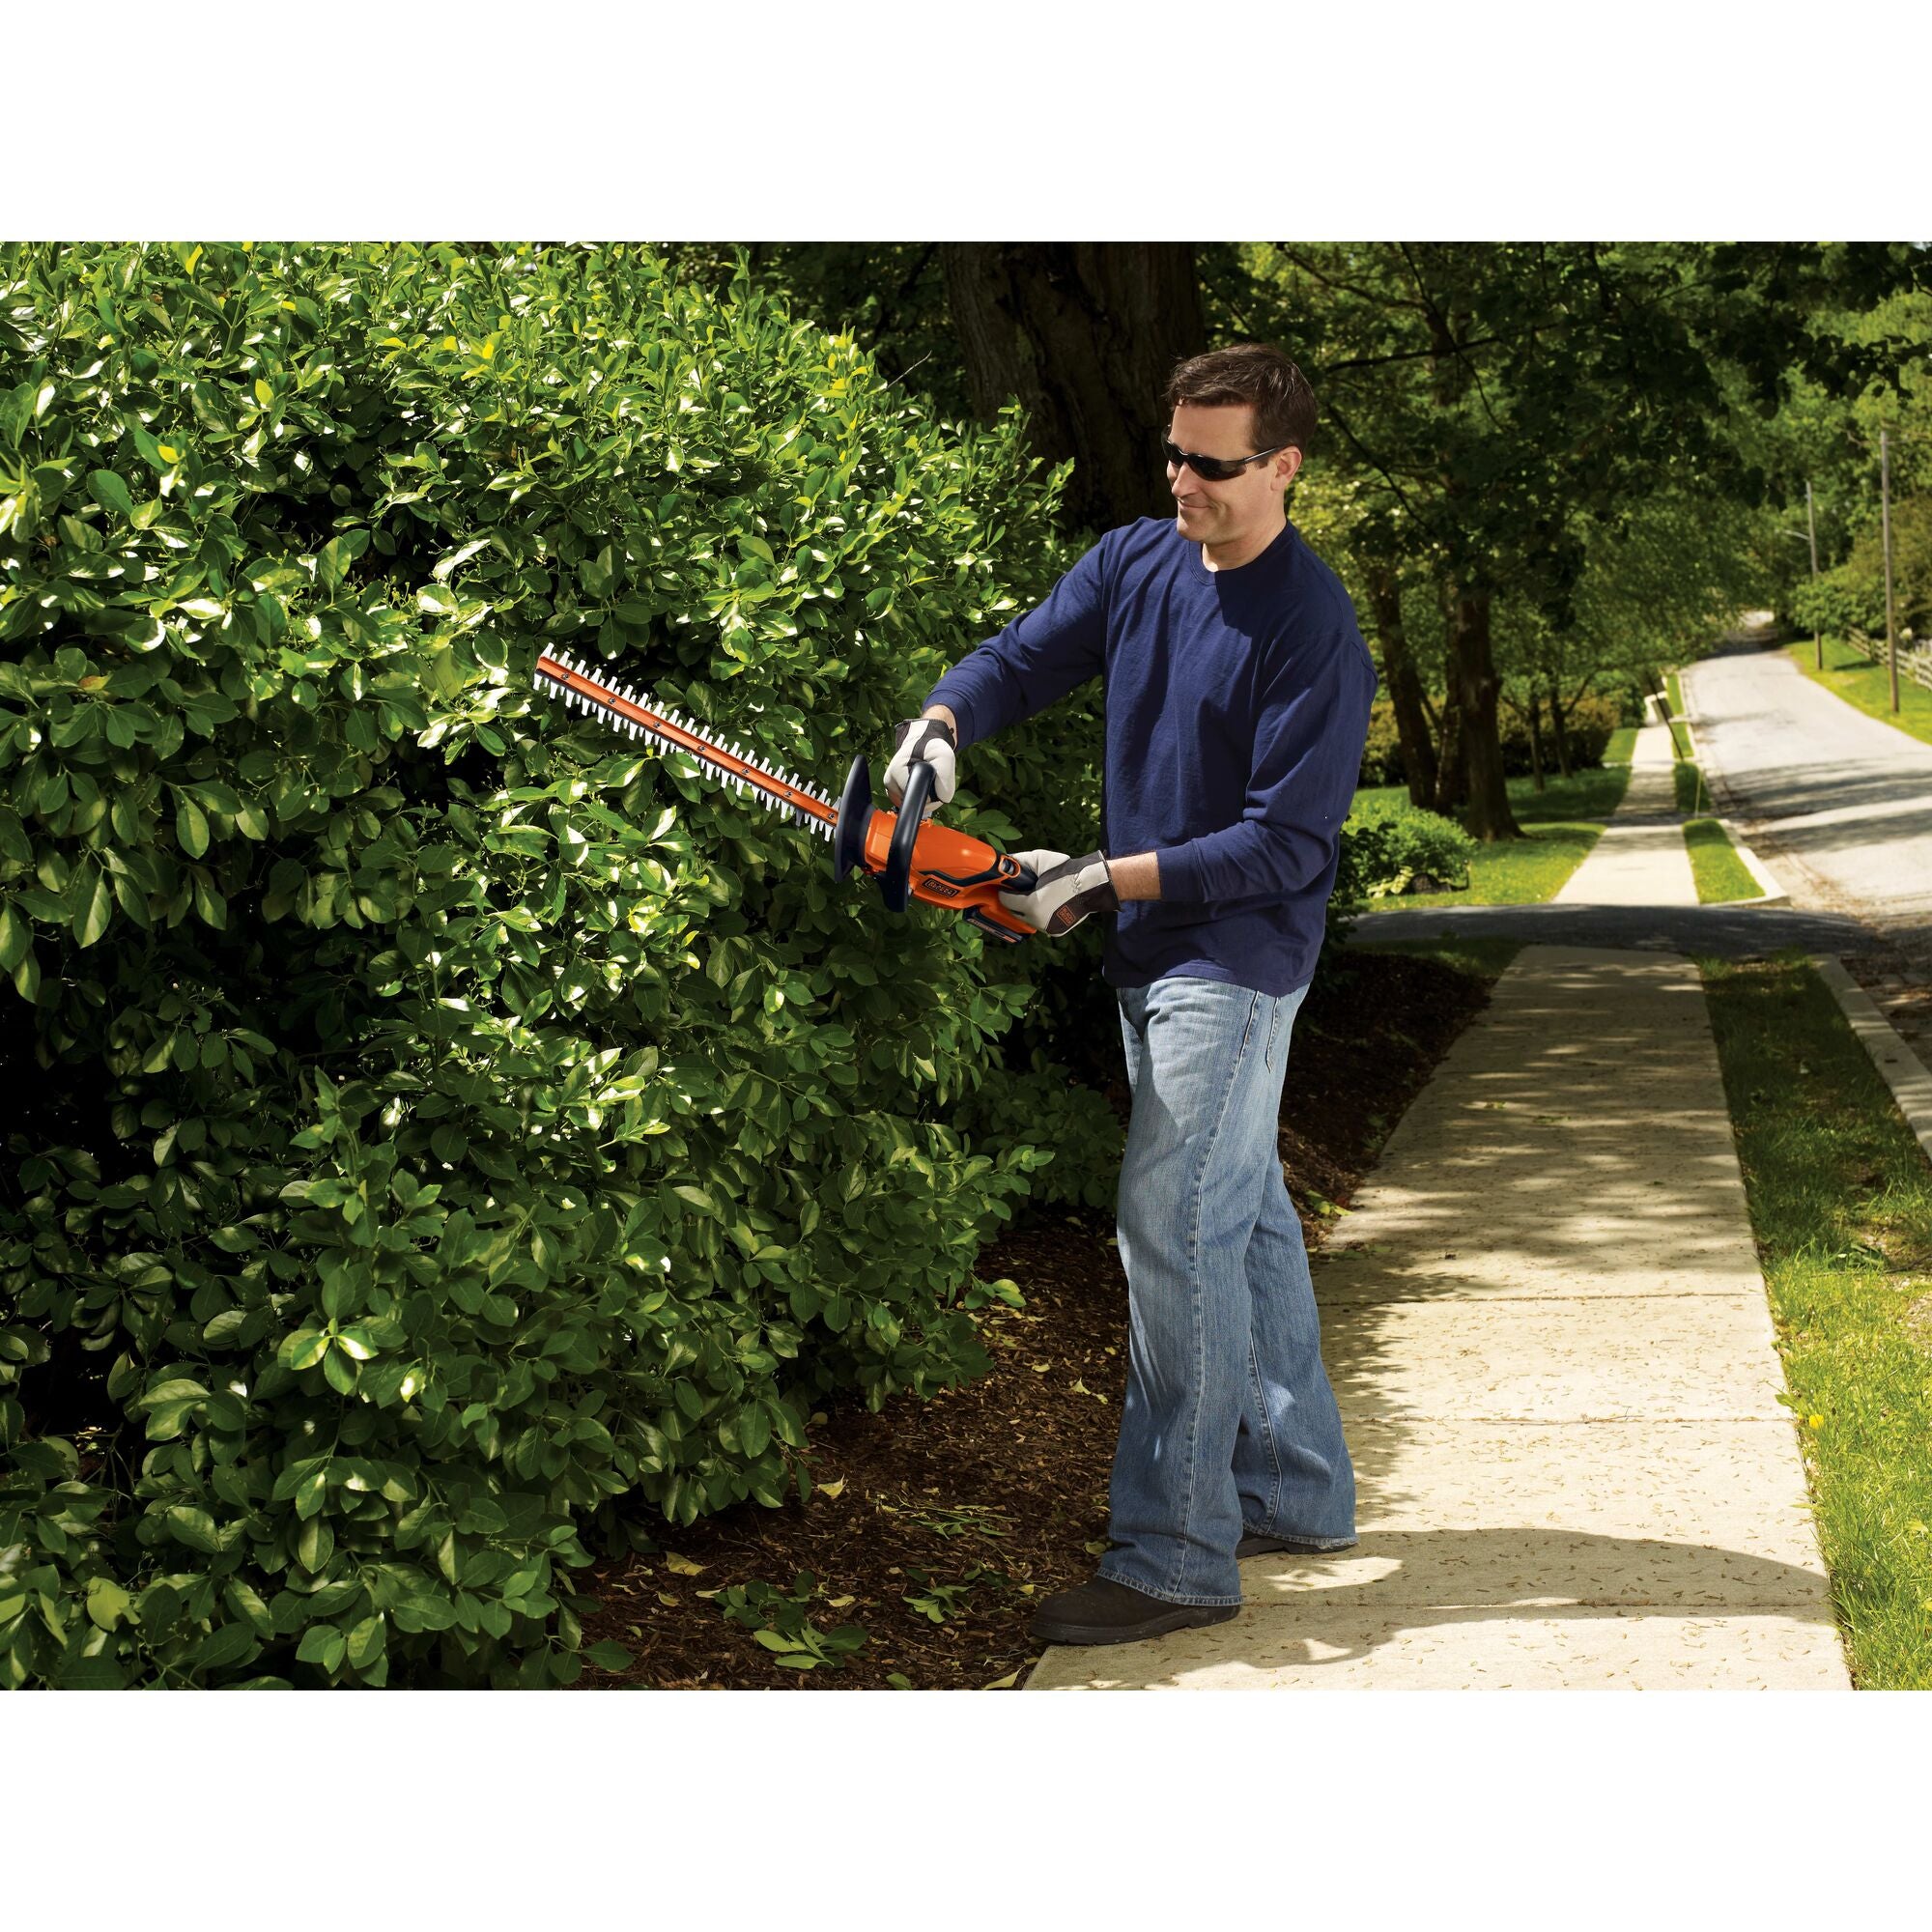 20V MAX* Cordless Hedge Trimmer, 22-Inch, Tool Only | BLACK+DECKER